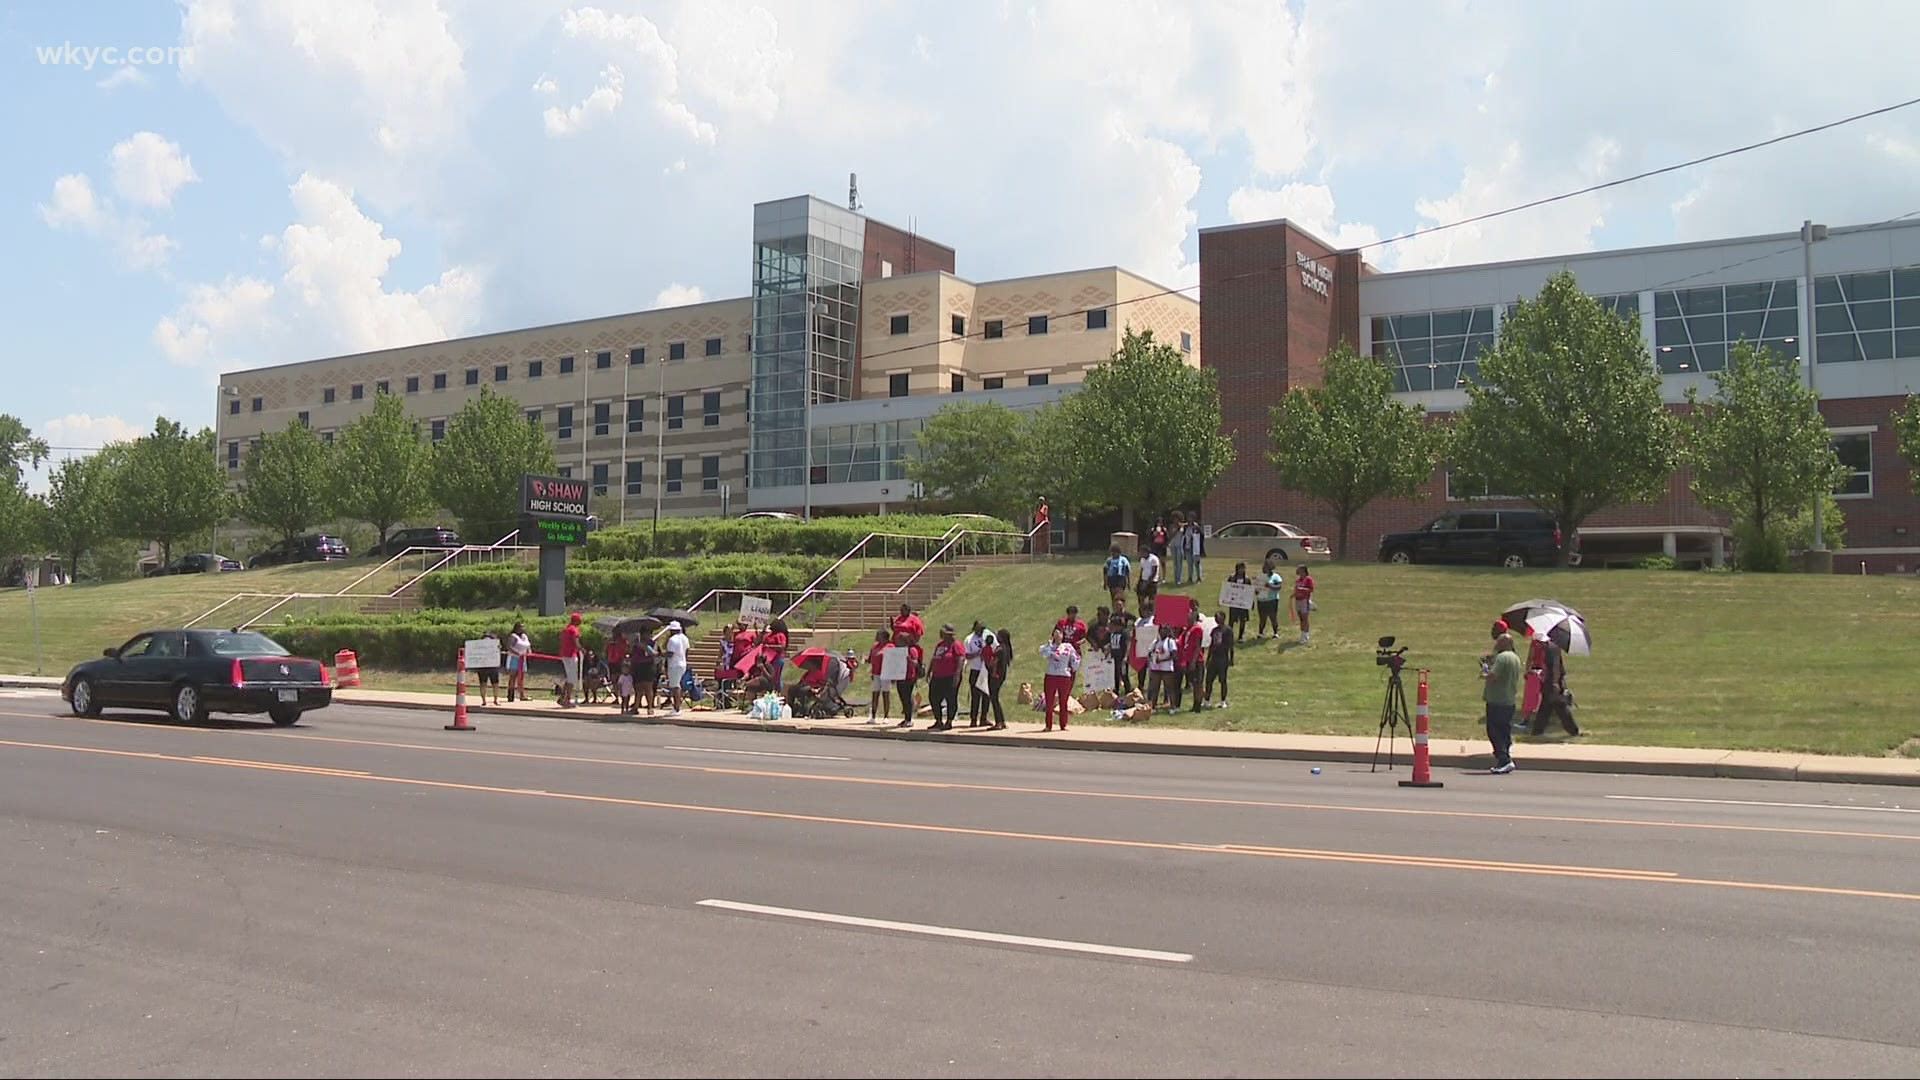 About 50 people showed up at the high school in East Cleveland to protest that Wilson is no longer on the job.